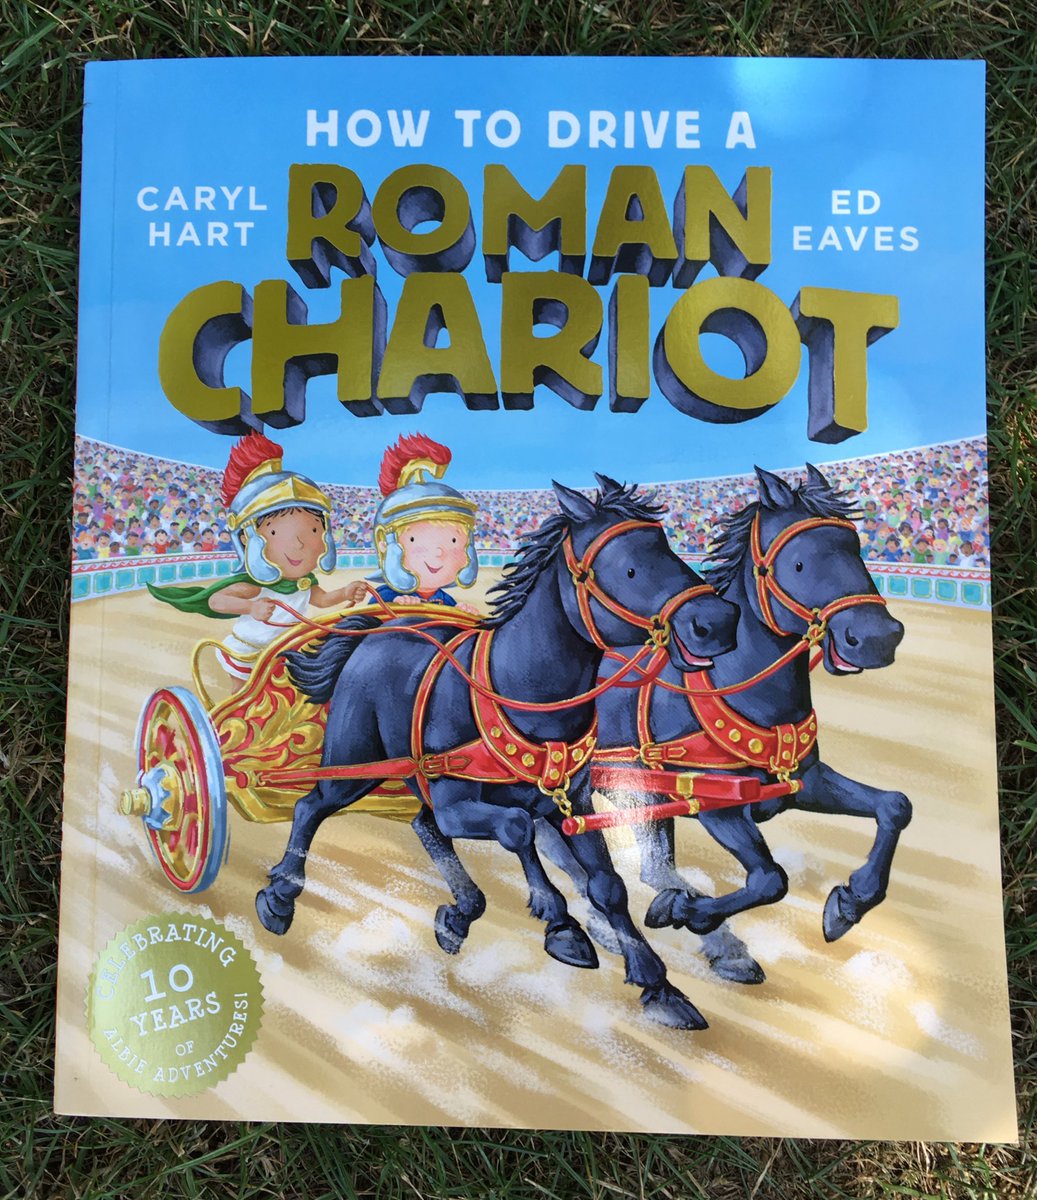 No.33  #LibraryTop50  @Ed_Eaves has illustrated lots of books that explain how to do things, such as drive a race car, a chariot and a digger, or how to find Egyptian treasure, or raise a dinosaur. His style is bold, chunky and colourful https://edeavesillustrator.com 